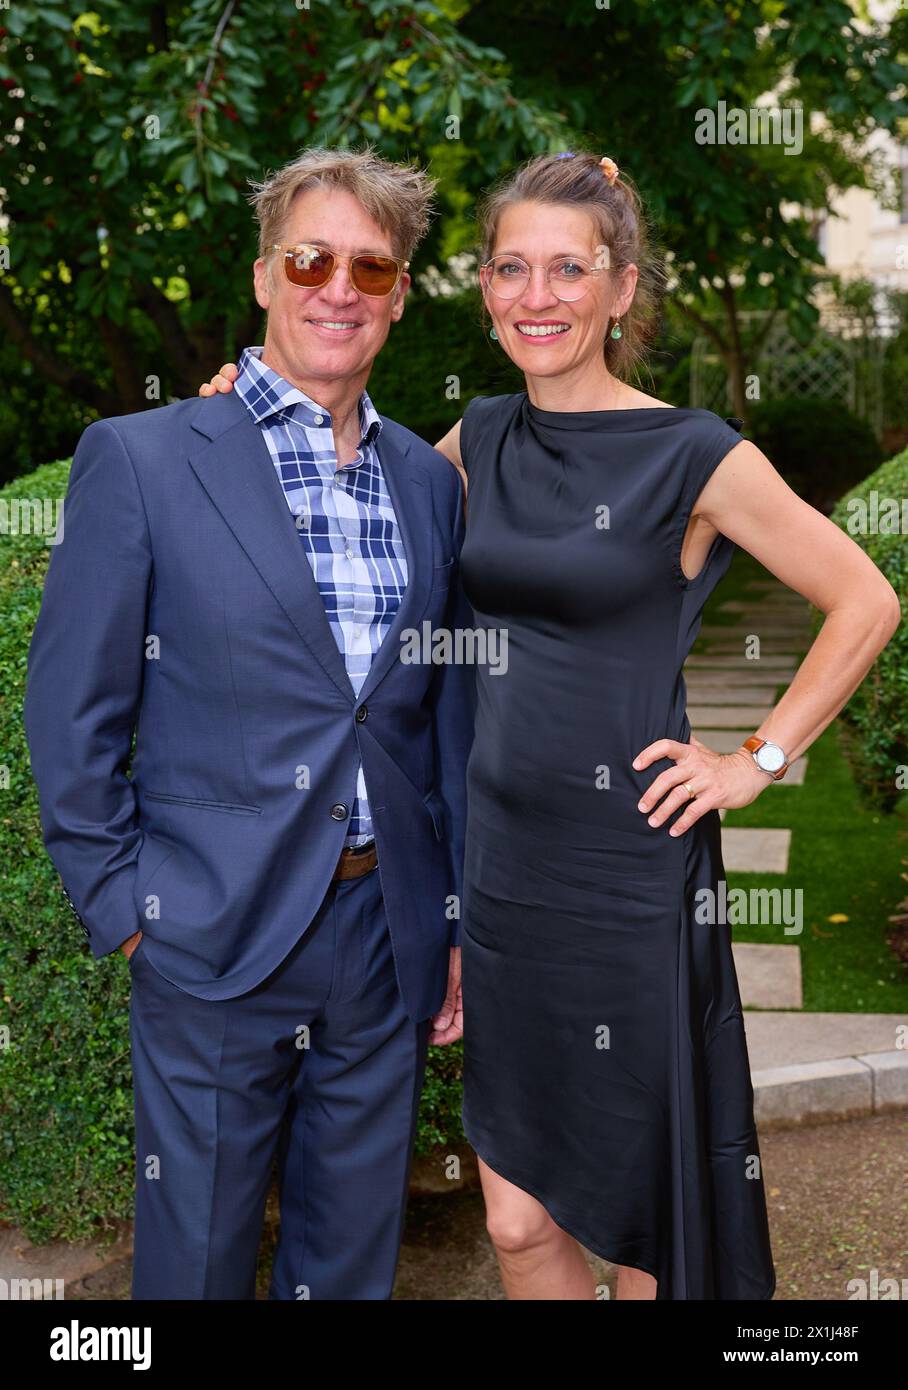 Austrian actor Tobias MORETTI with his wife Julia were honored as Feinschmecker des Jahres 2021 by Gault & Millau at Palais Coburg in Vienna, Austria, on June 24, 2021. - 20210624 PD14087 - Rechteinfo: Rights Managed (RM) Stock Photo